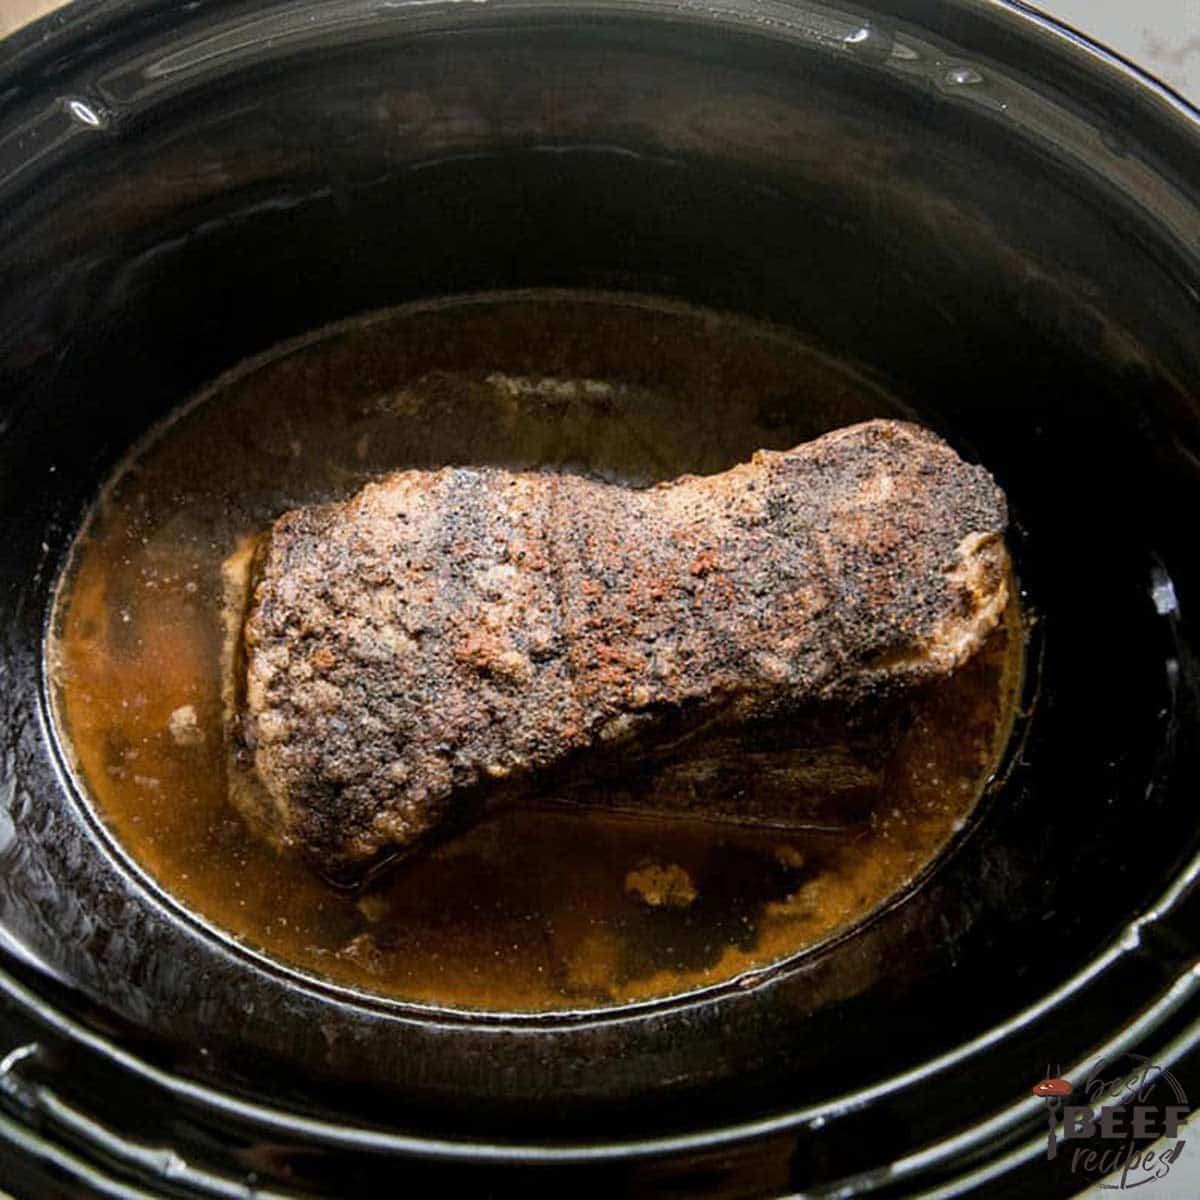 Beef brisket after slow cooking, still in cooker